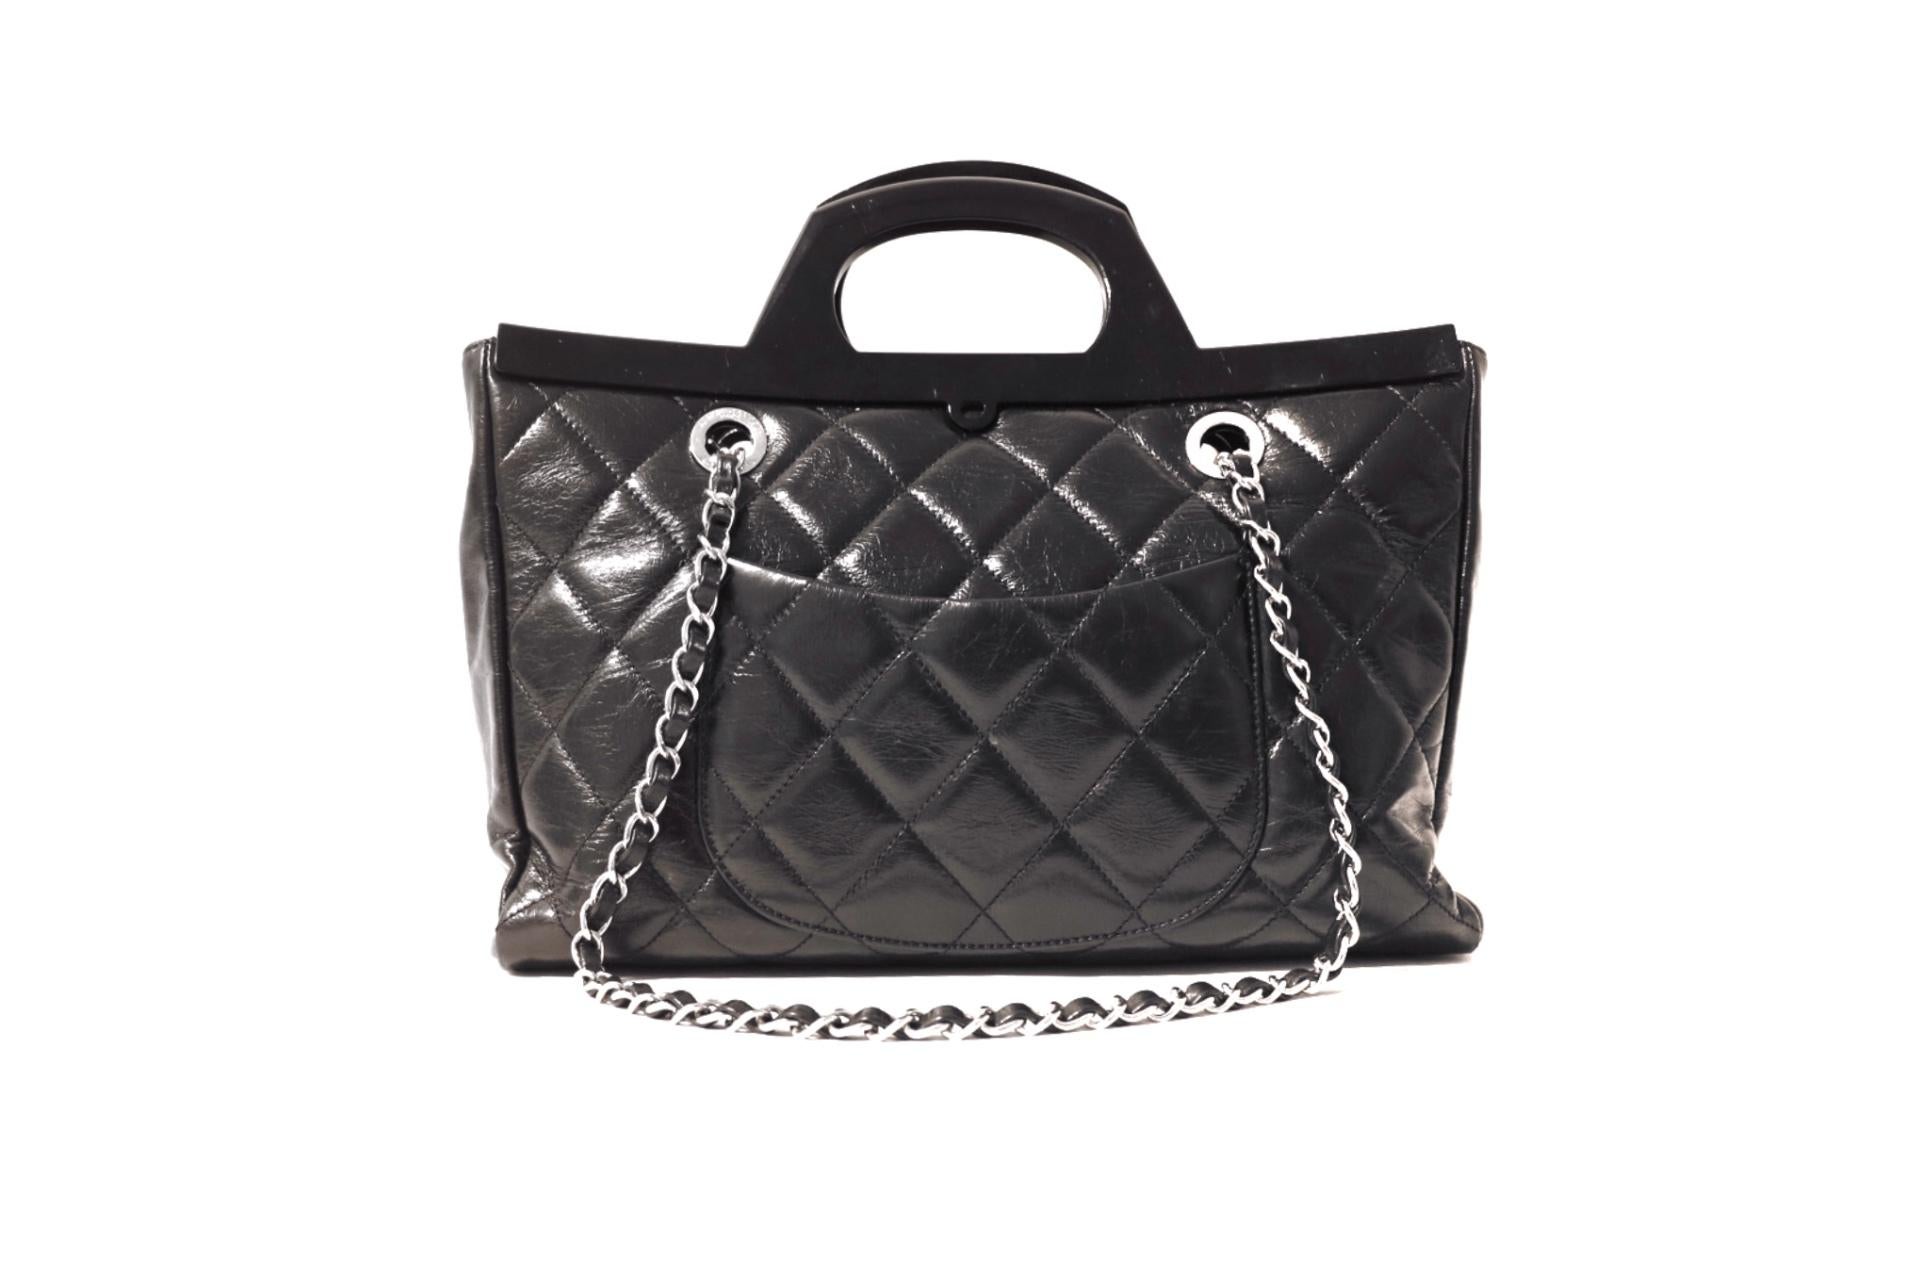 This authentic Chanel Black Calfskin CC Delivery Tote is in excellent plus condition.  From the 2014 collection, the sophisticated CC Delivery Tote allows for top handle or shoulder strap carry.  
Clack glazed calfskin is quilted in signature Chanel